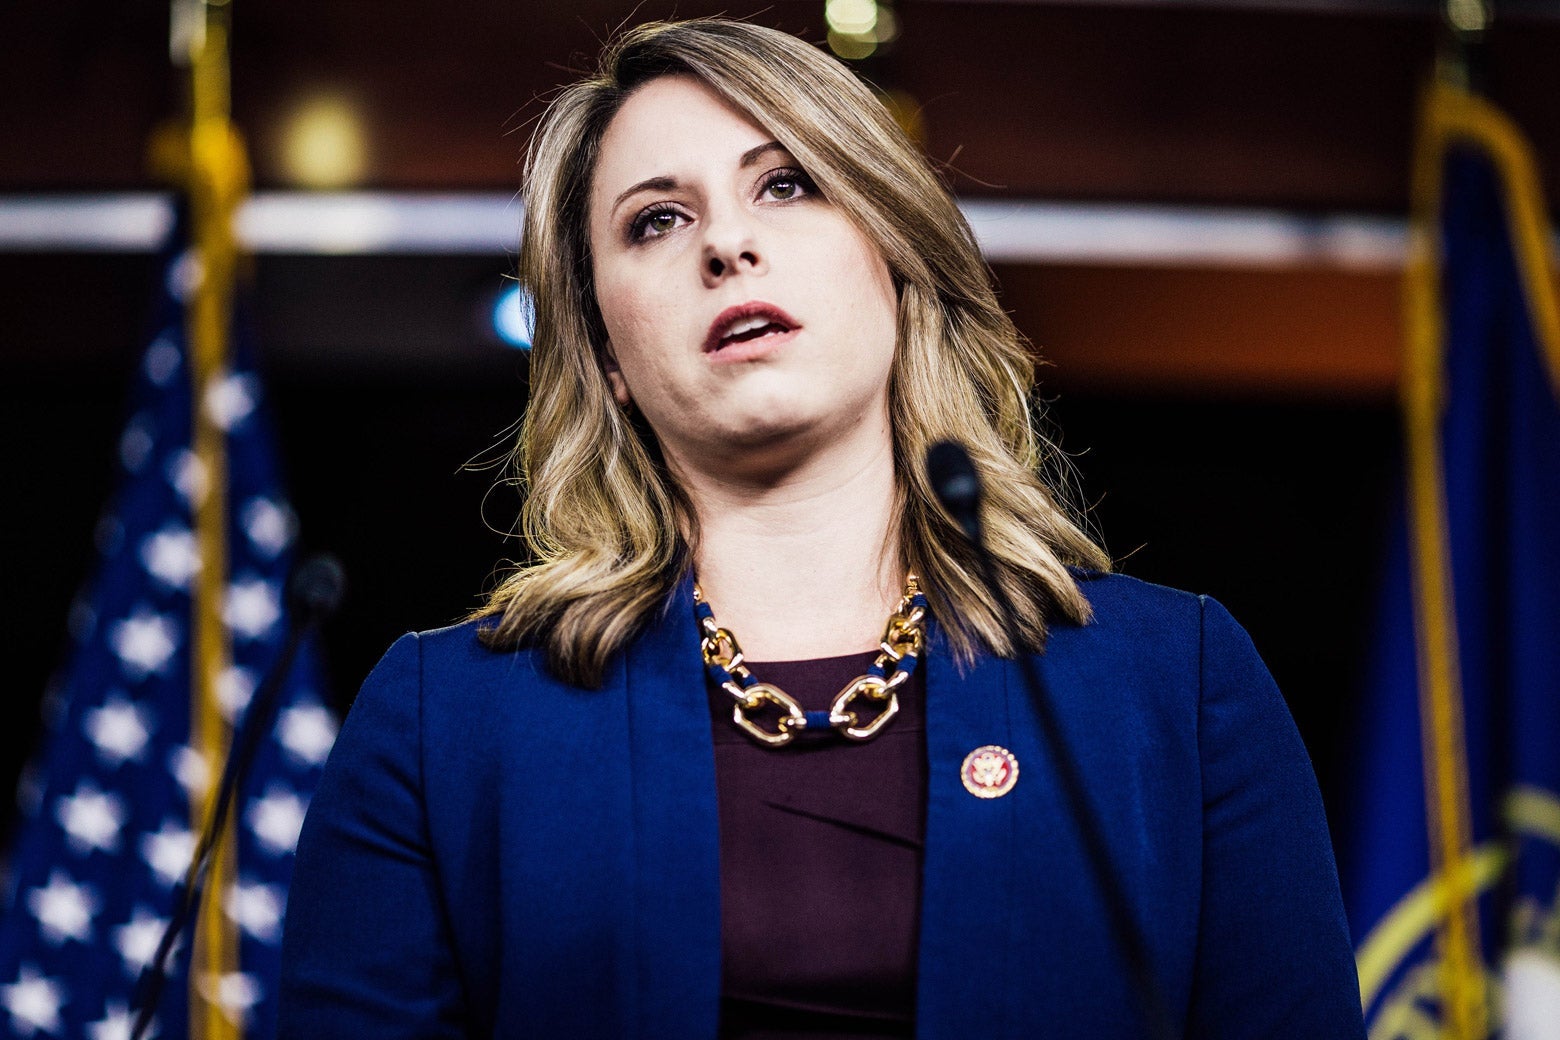 Then-Rep. Katie Hill is caught mid-word during a news conference demanding the production of documents related to Americans health care in the Texas v. United States lawsuit.